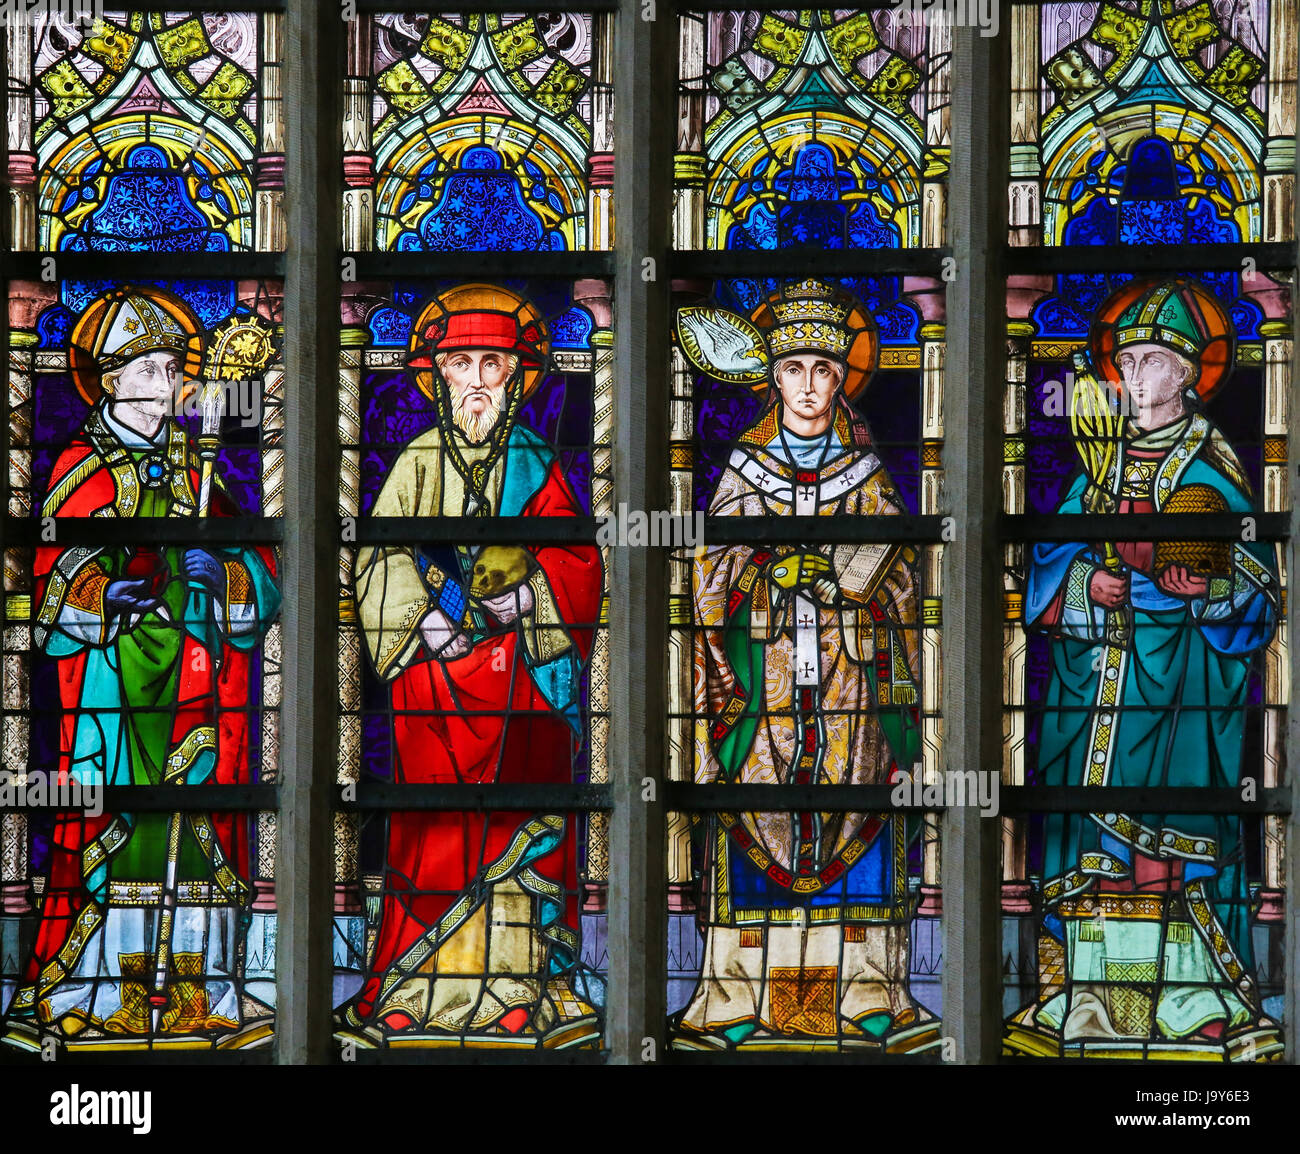 Stained Glass window in St Gummarus Church in Lier, Belgium, depicting Catholic Saints Augustine, Jerome, Gregory and Ambrose Stock Photo